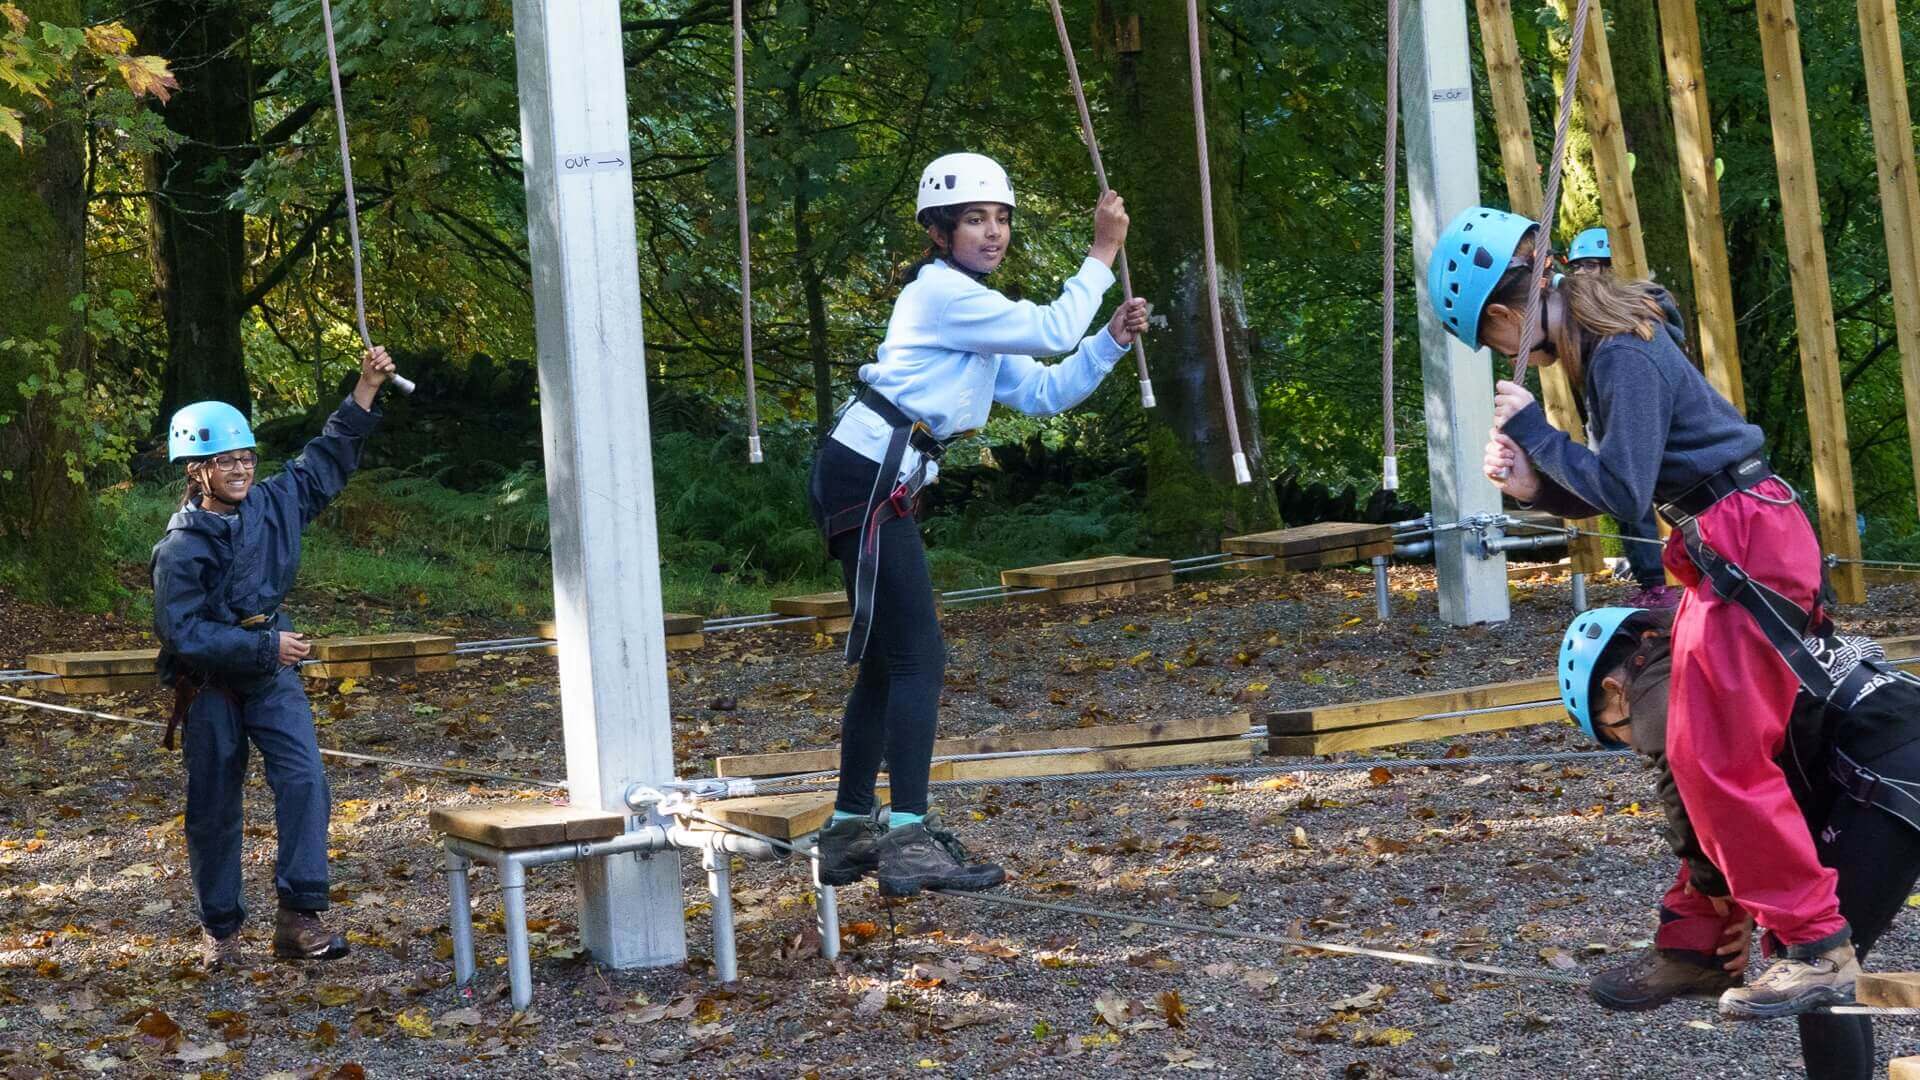 Members climbing on the ropes course